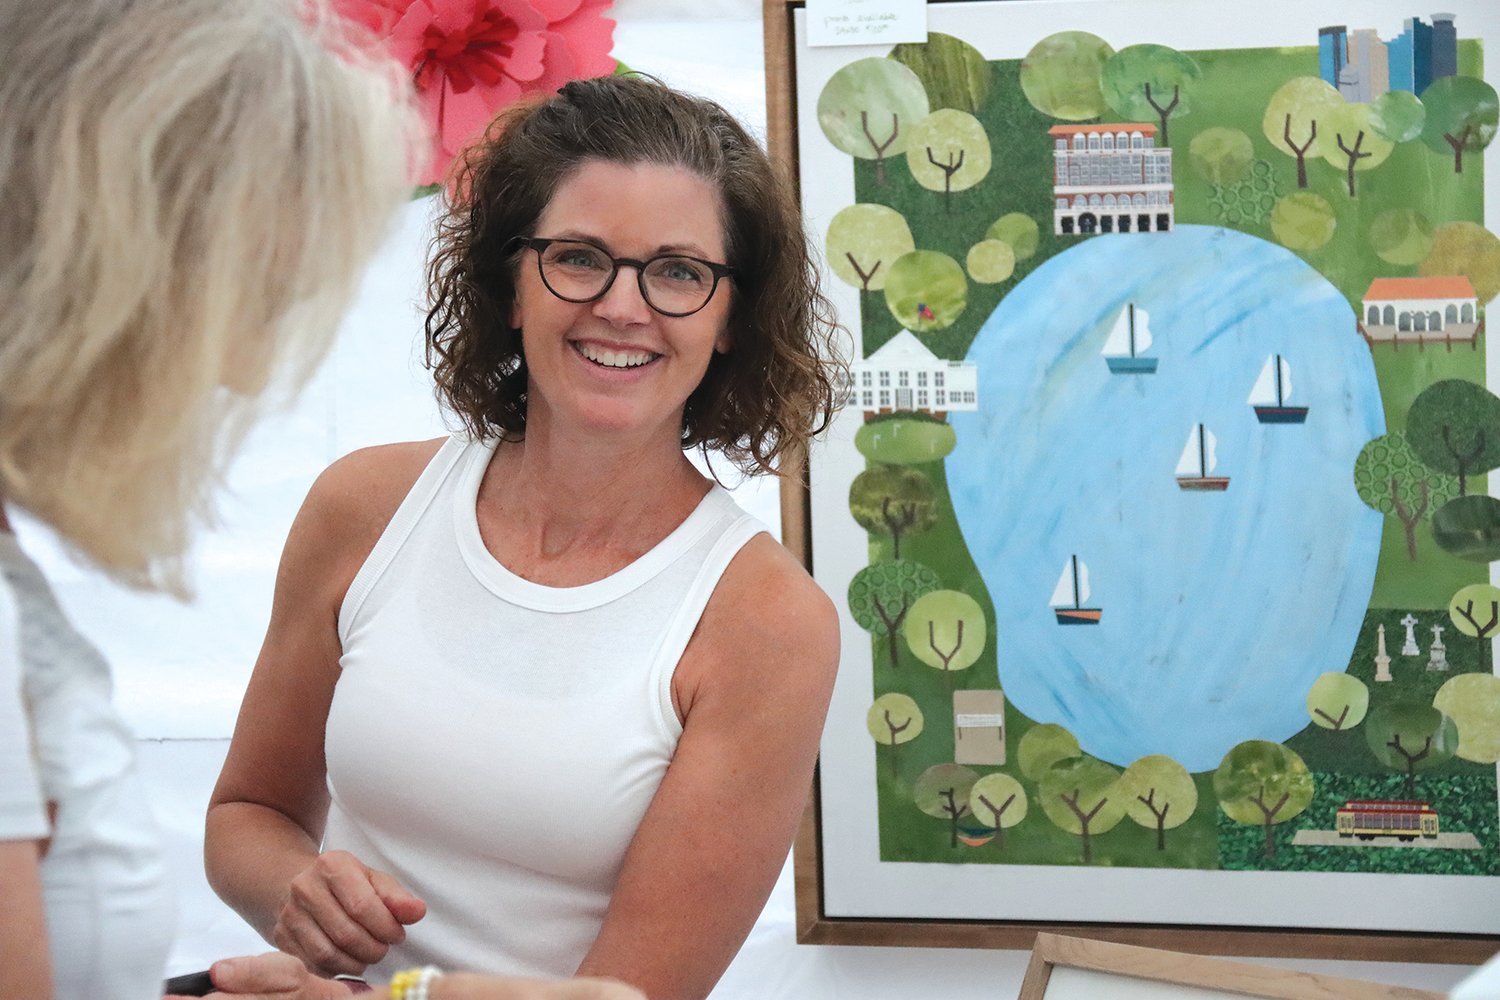 Lynhurst resident Kathy Pope of Yellow Dog Collage sells her handcrafted collages. “I’m really inspired by color and pattern,” she said.